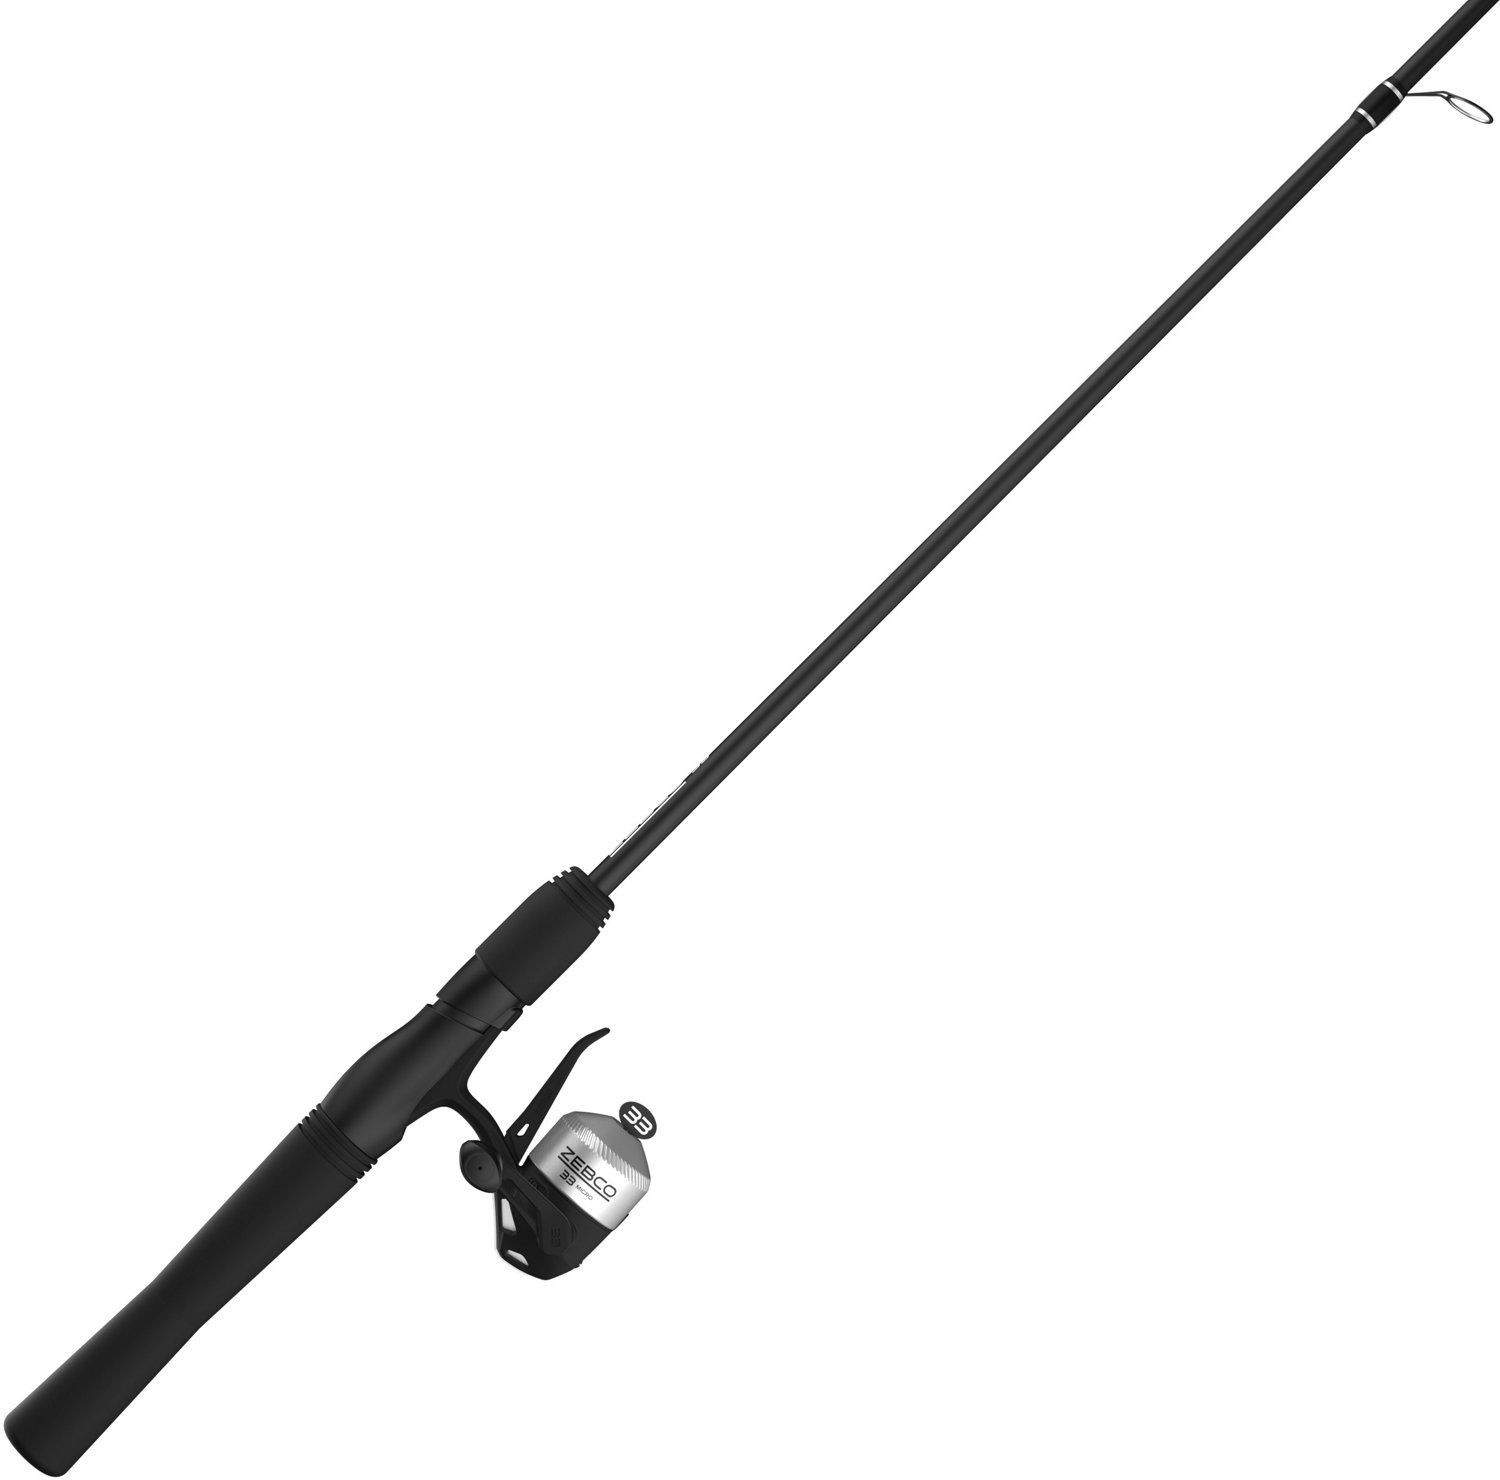 Zebco 33 Micro Trigger 5 ft UL Freshwater Triggerspin Rod and Reel